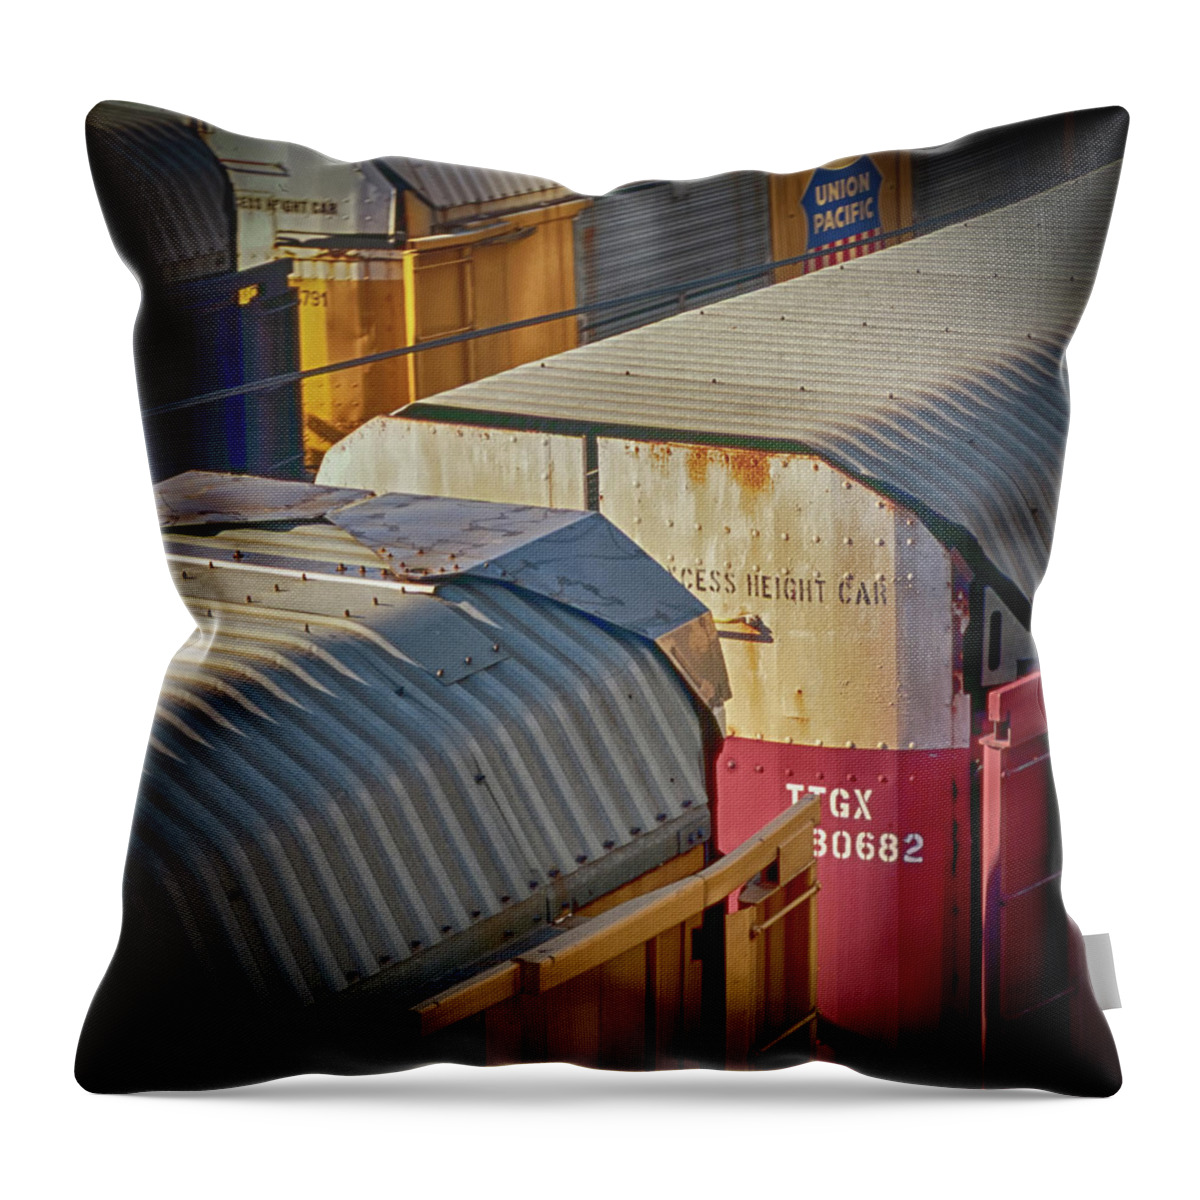 Trains Throw Pillow featuring the photograph Trains - Nashville by Samuel M Purvis III